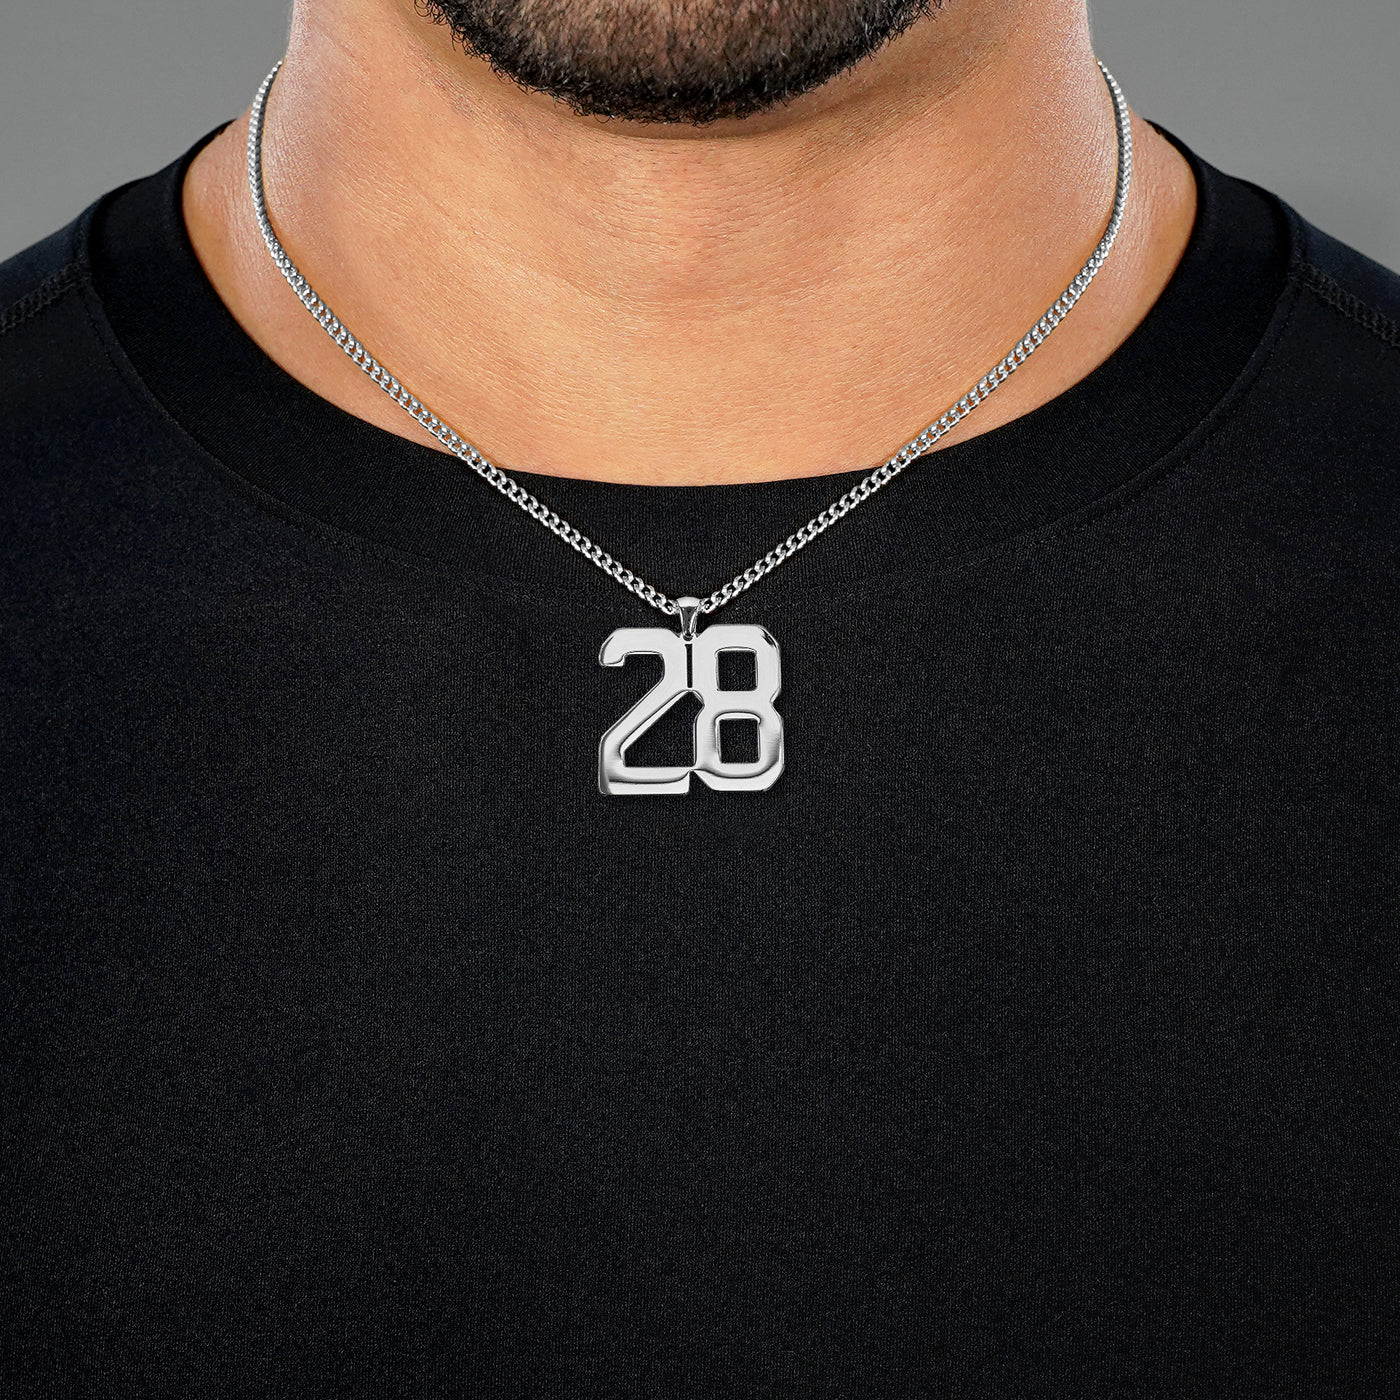 28 Number Pendant with Chain Necklace - Stainless Steel